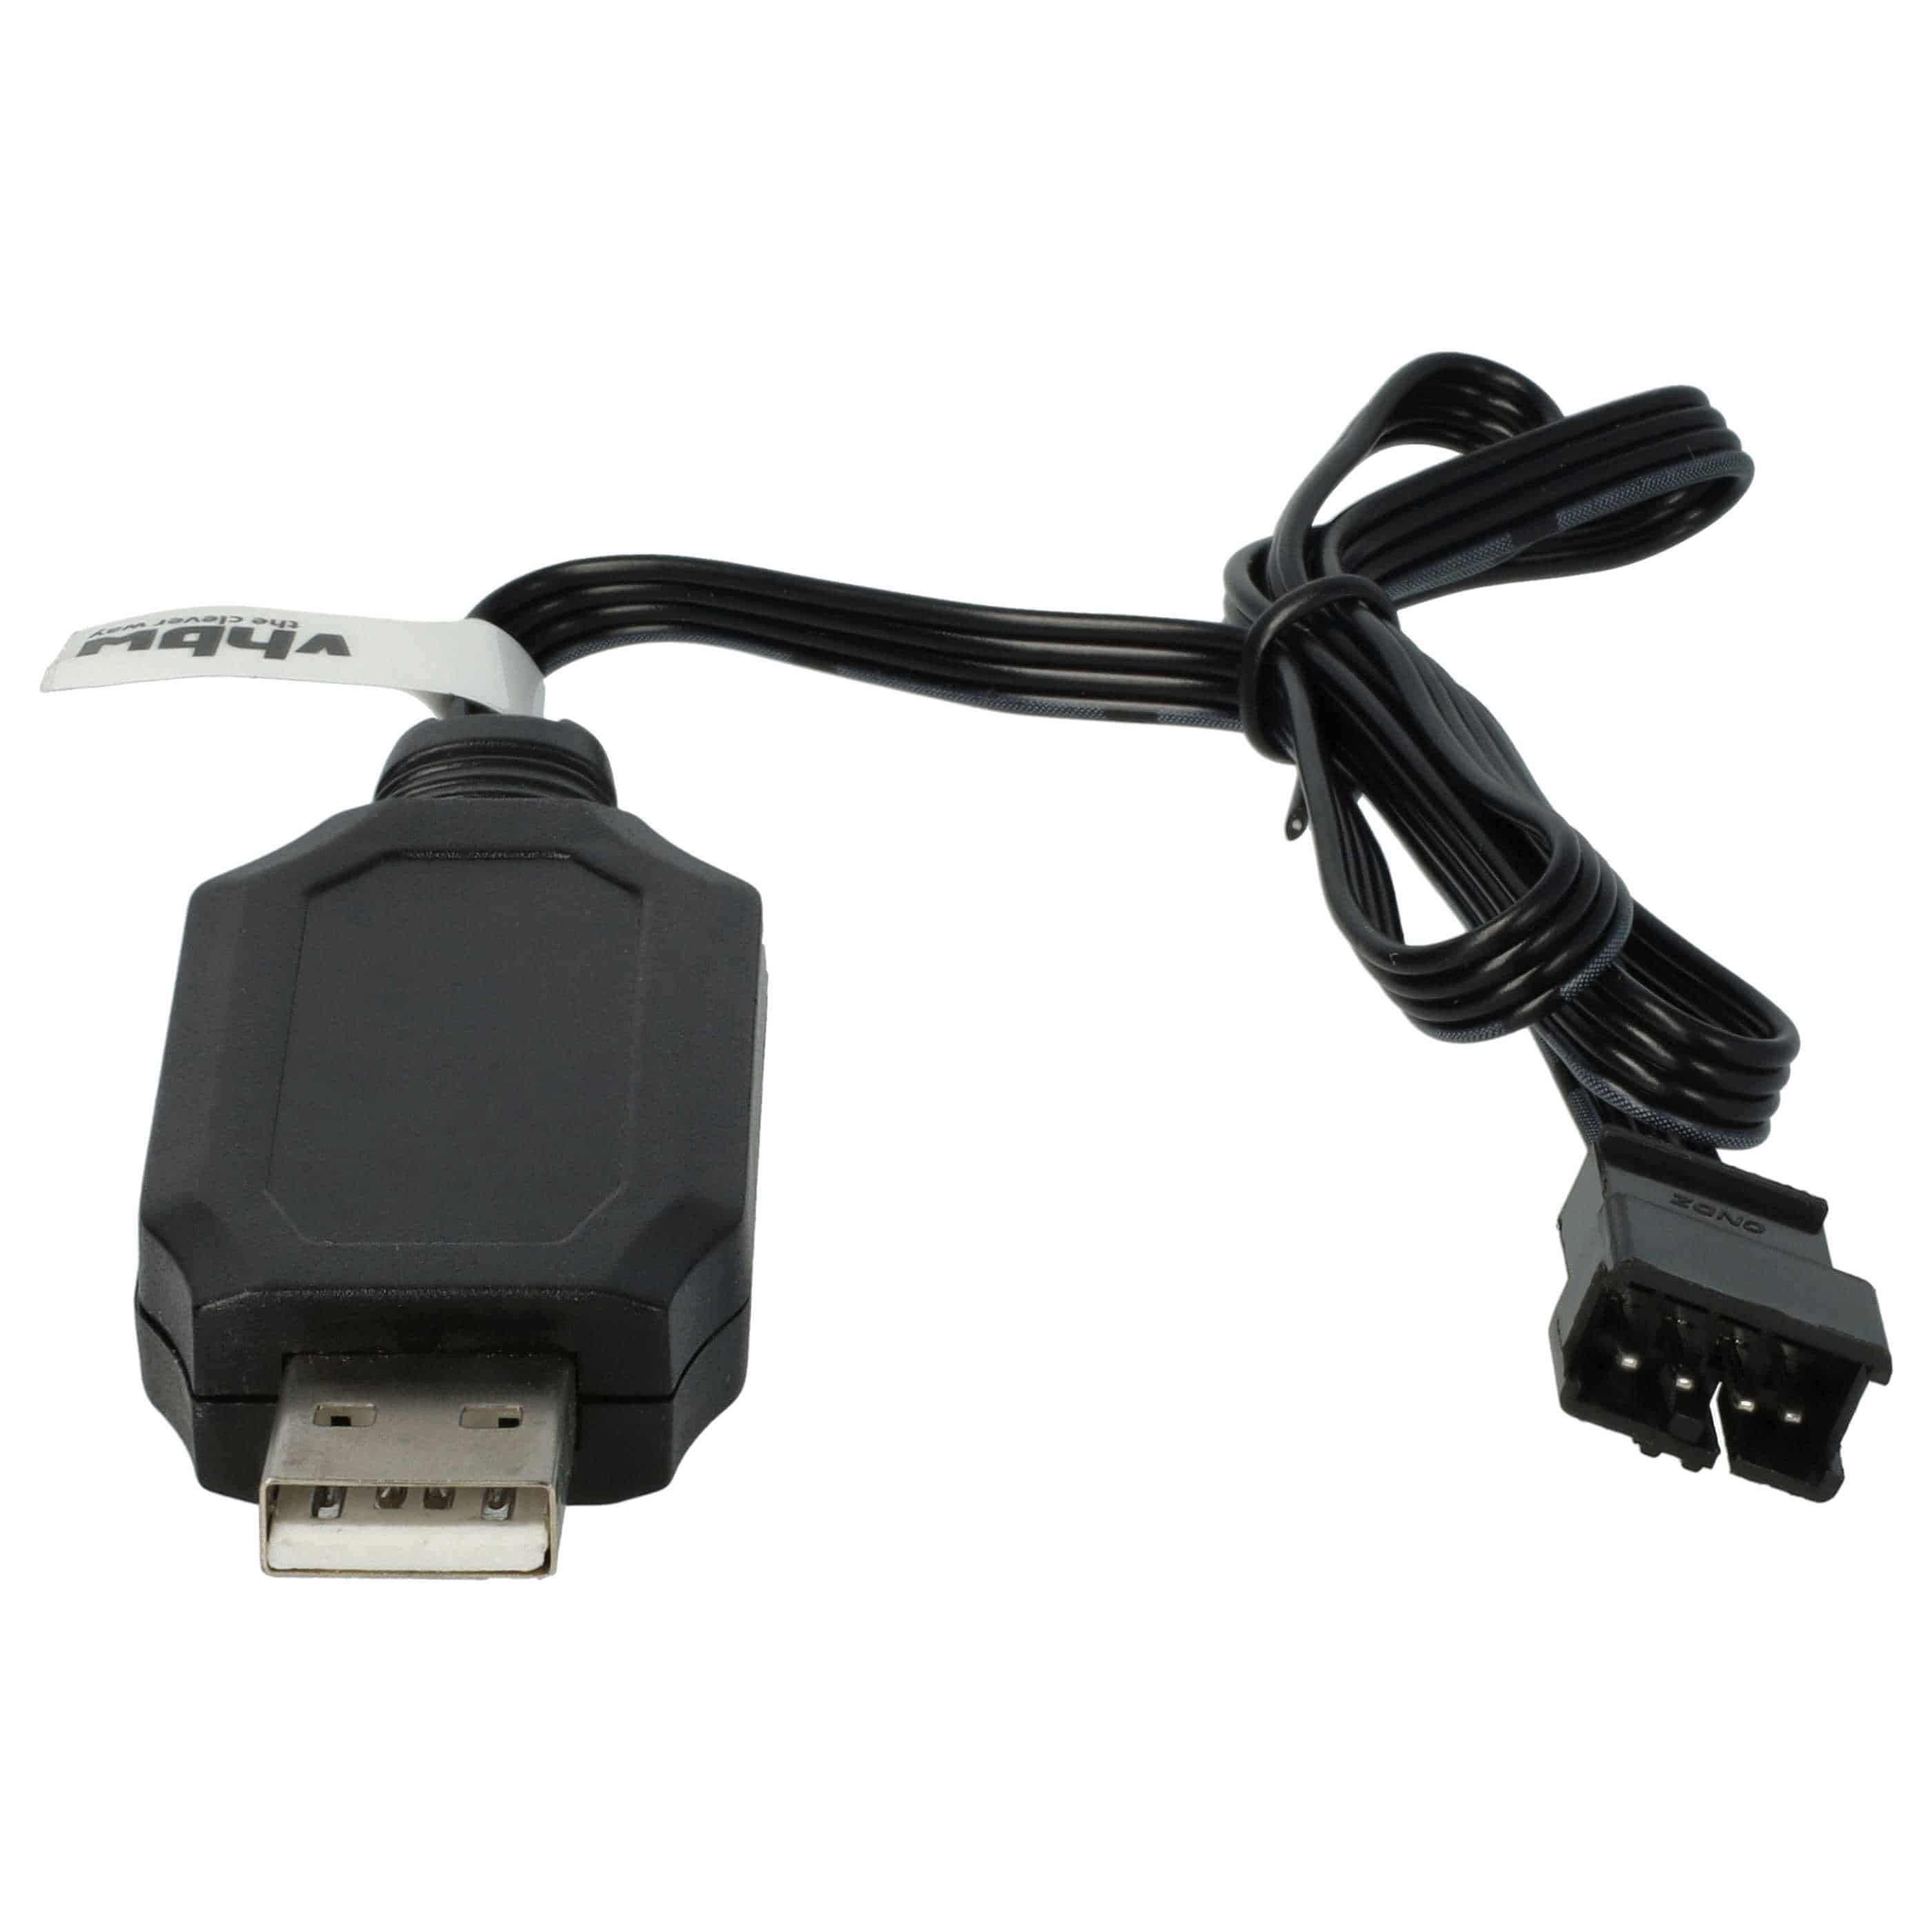 USB Charging Cable suitable for RC Batteries with SM-4P Connector, RC Model Making Battery Packs - 60 cm 7.5 V